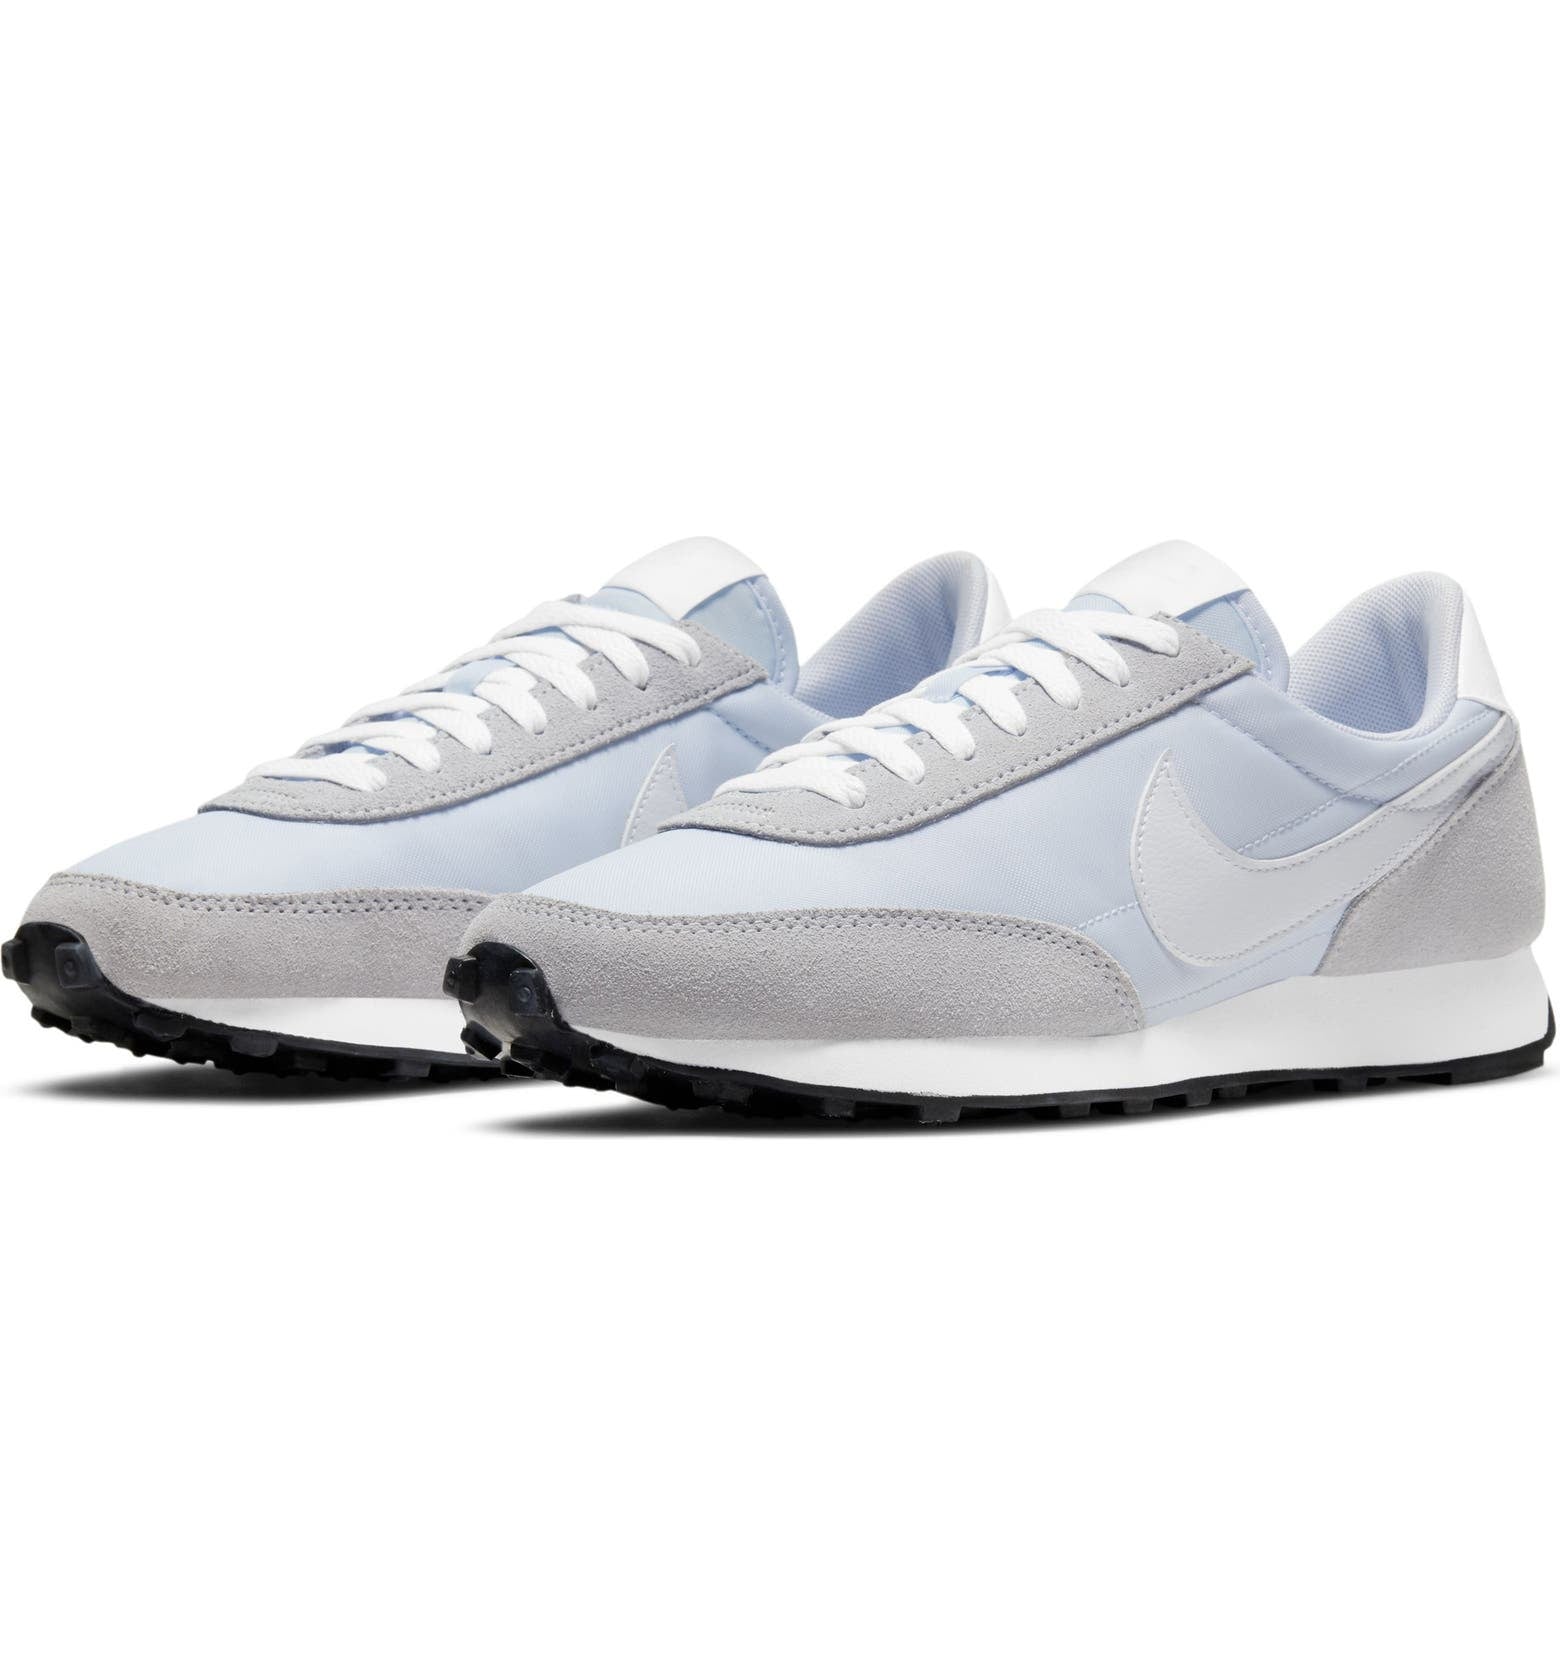 Nike Daybreak Sneakers Nordstrom's Big Spring Is Here! Hurry and Shop Our 100+ Favorite Deals | POPSUGAR Fashion Photo 111